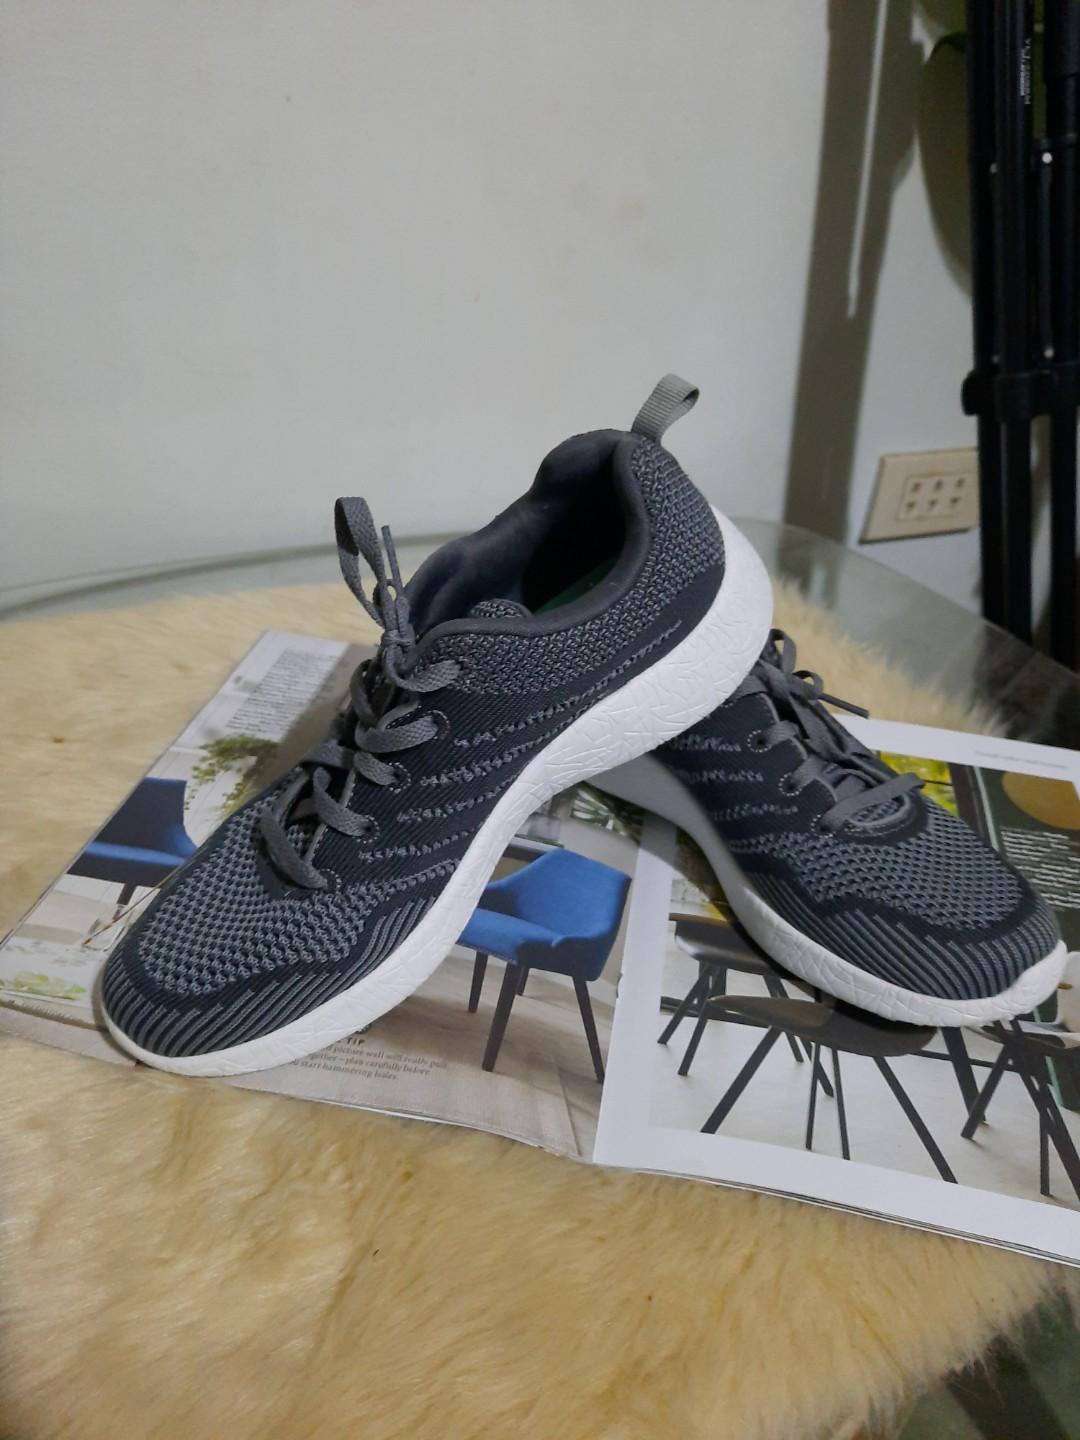 skechers lite weight shoes